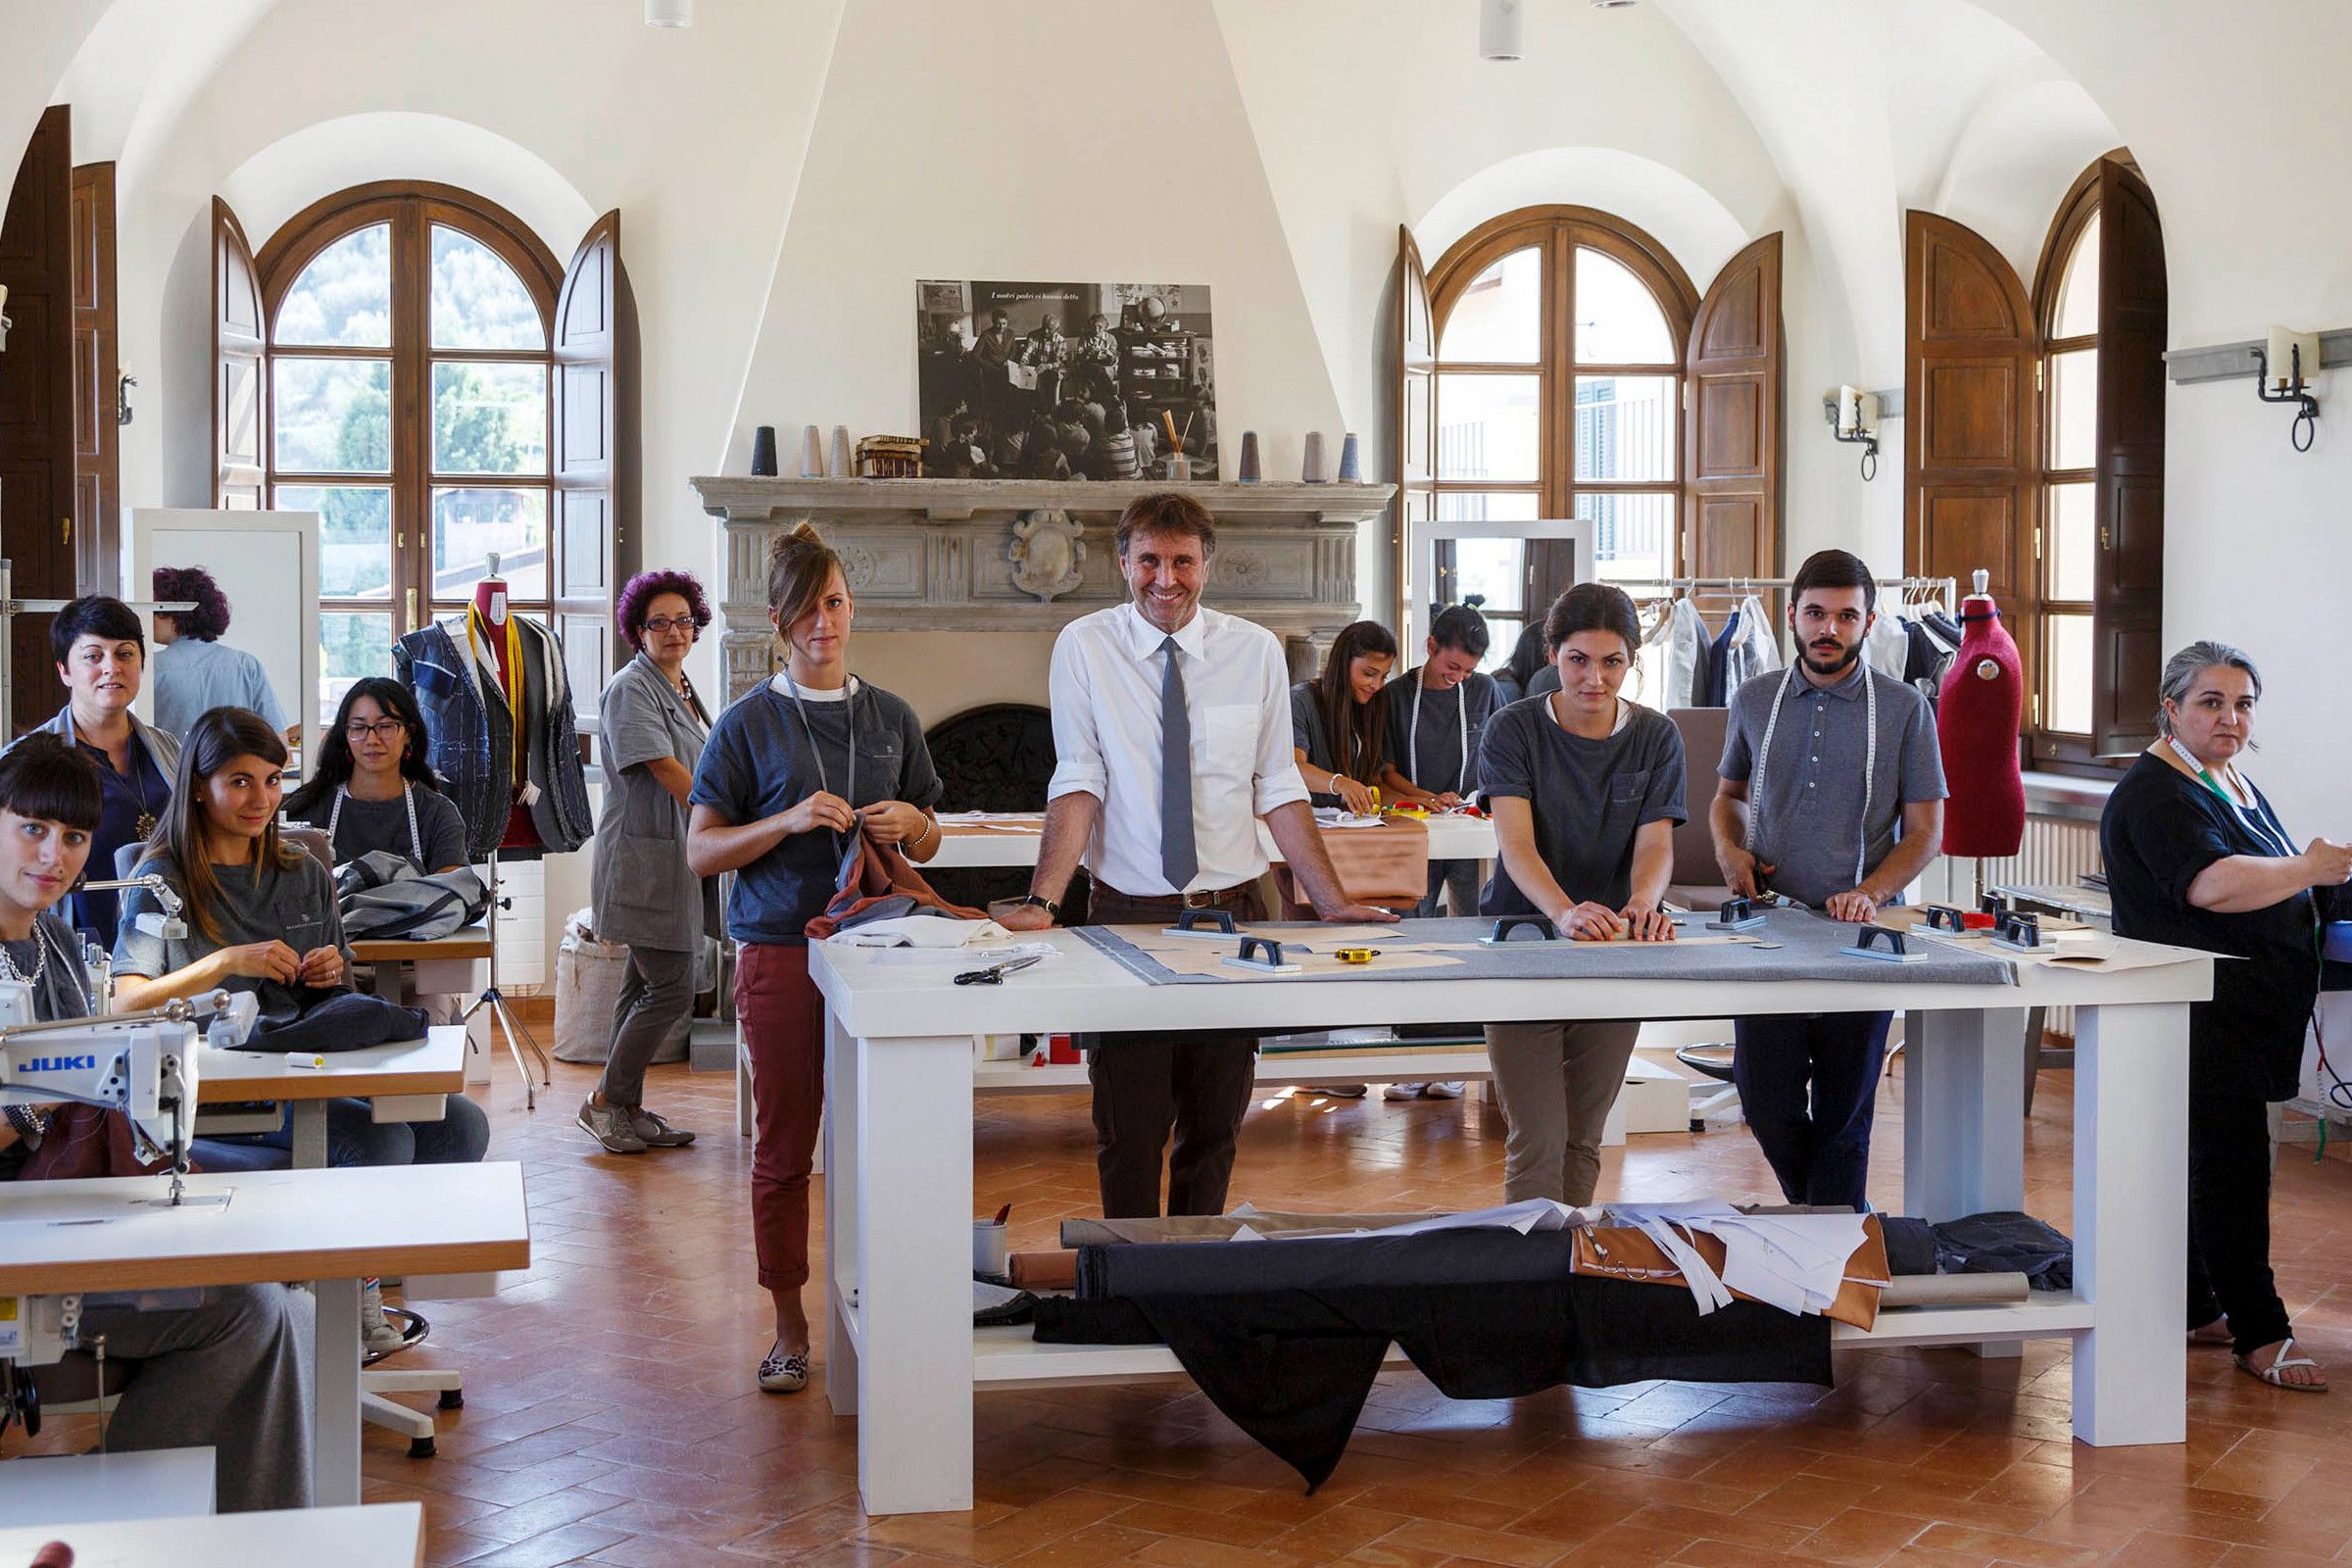 The OS for Brunello Cucinelli Customers